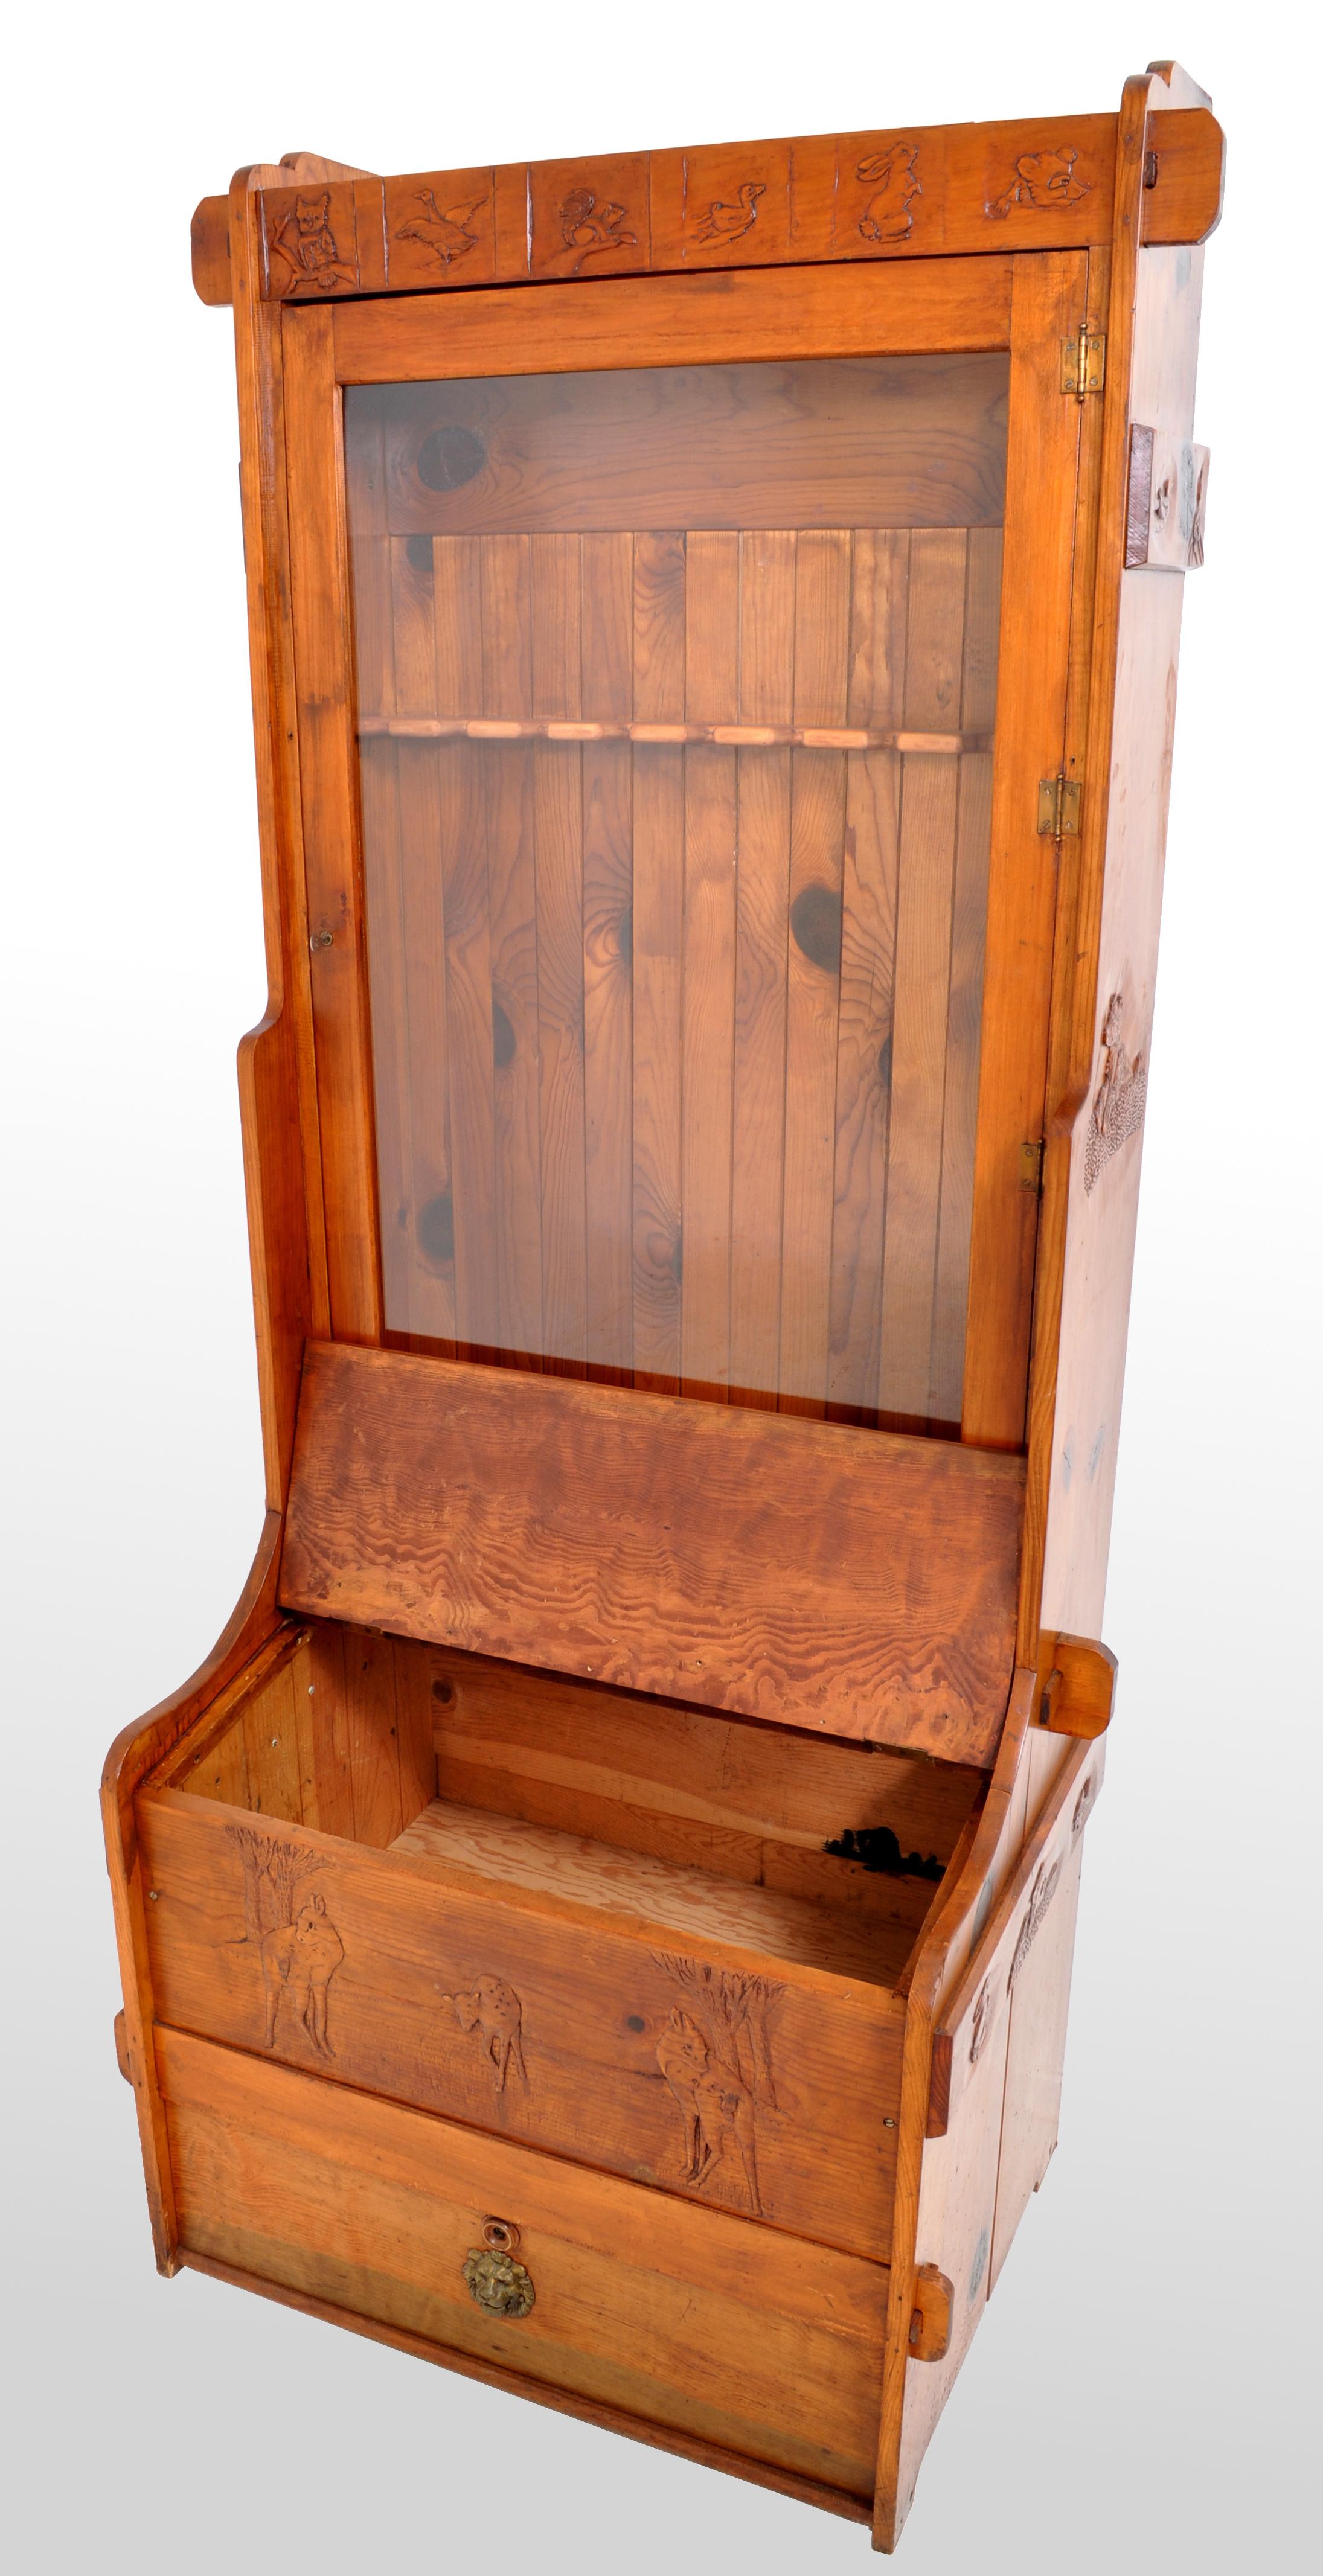 20th Century Antique American Carved Knotty Pine Country Gun Rifle Display Cabinet circa 1920